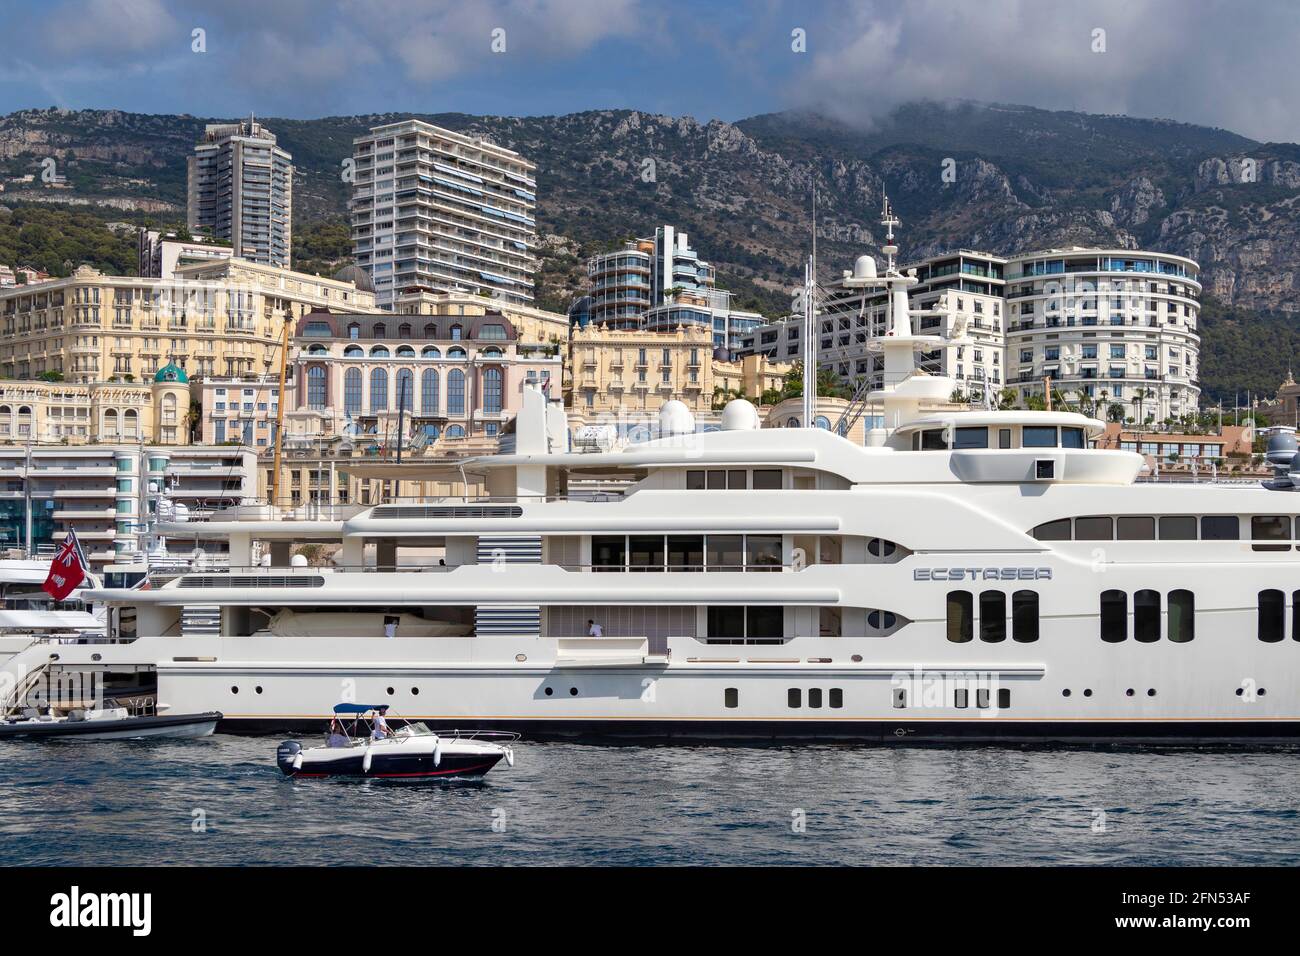 Hillsides and buildings bordering the yacht and boat marina at Monte Carlo, Monaco on the French Riviera. Stock Photo